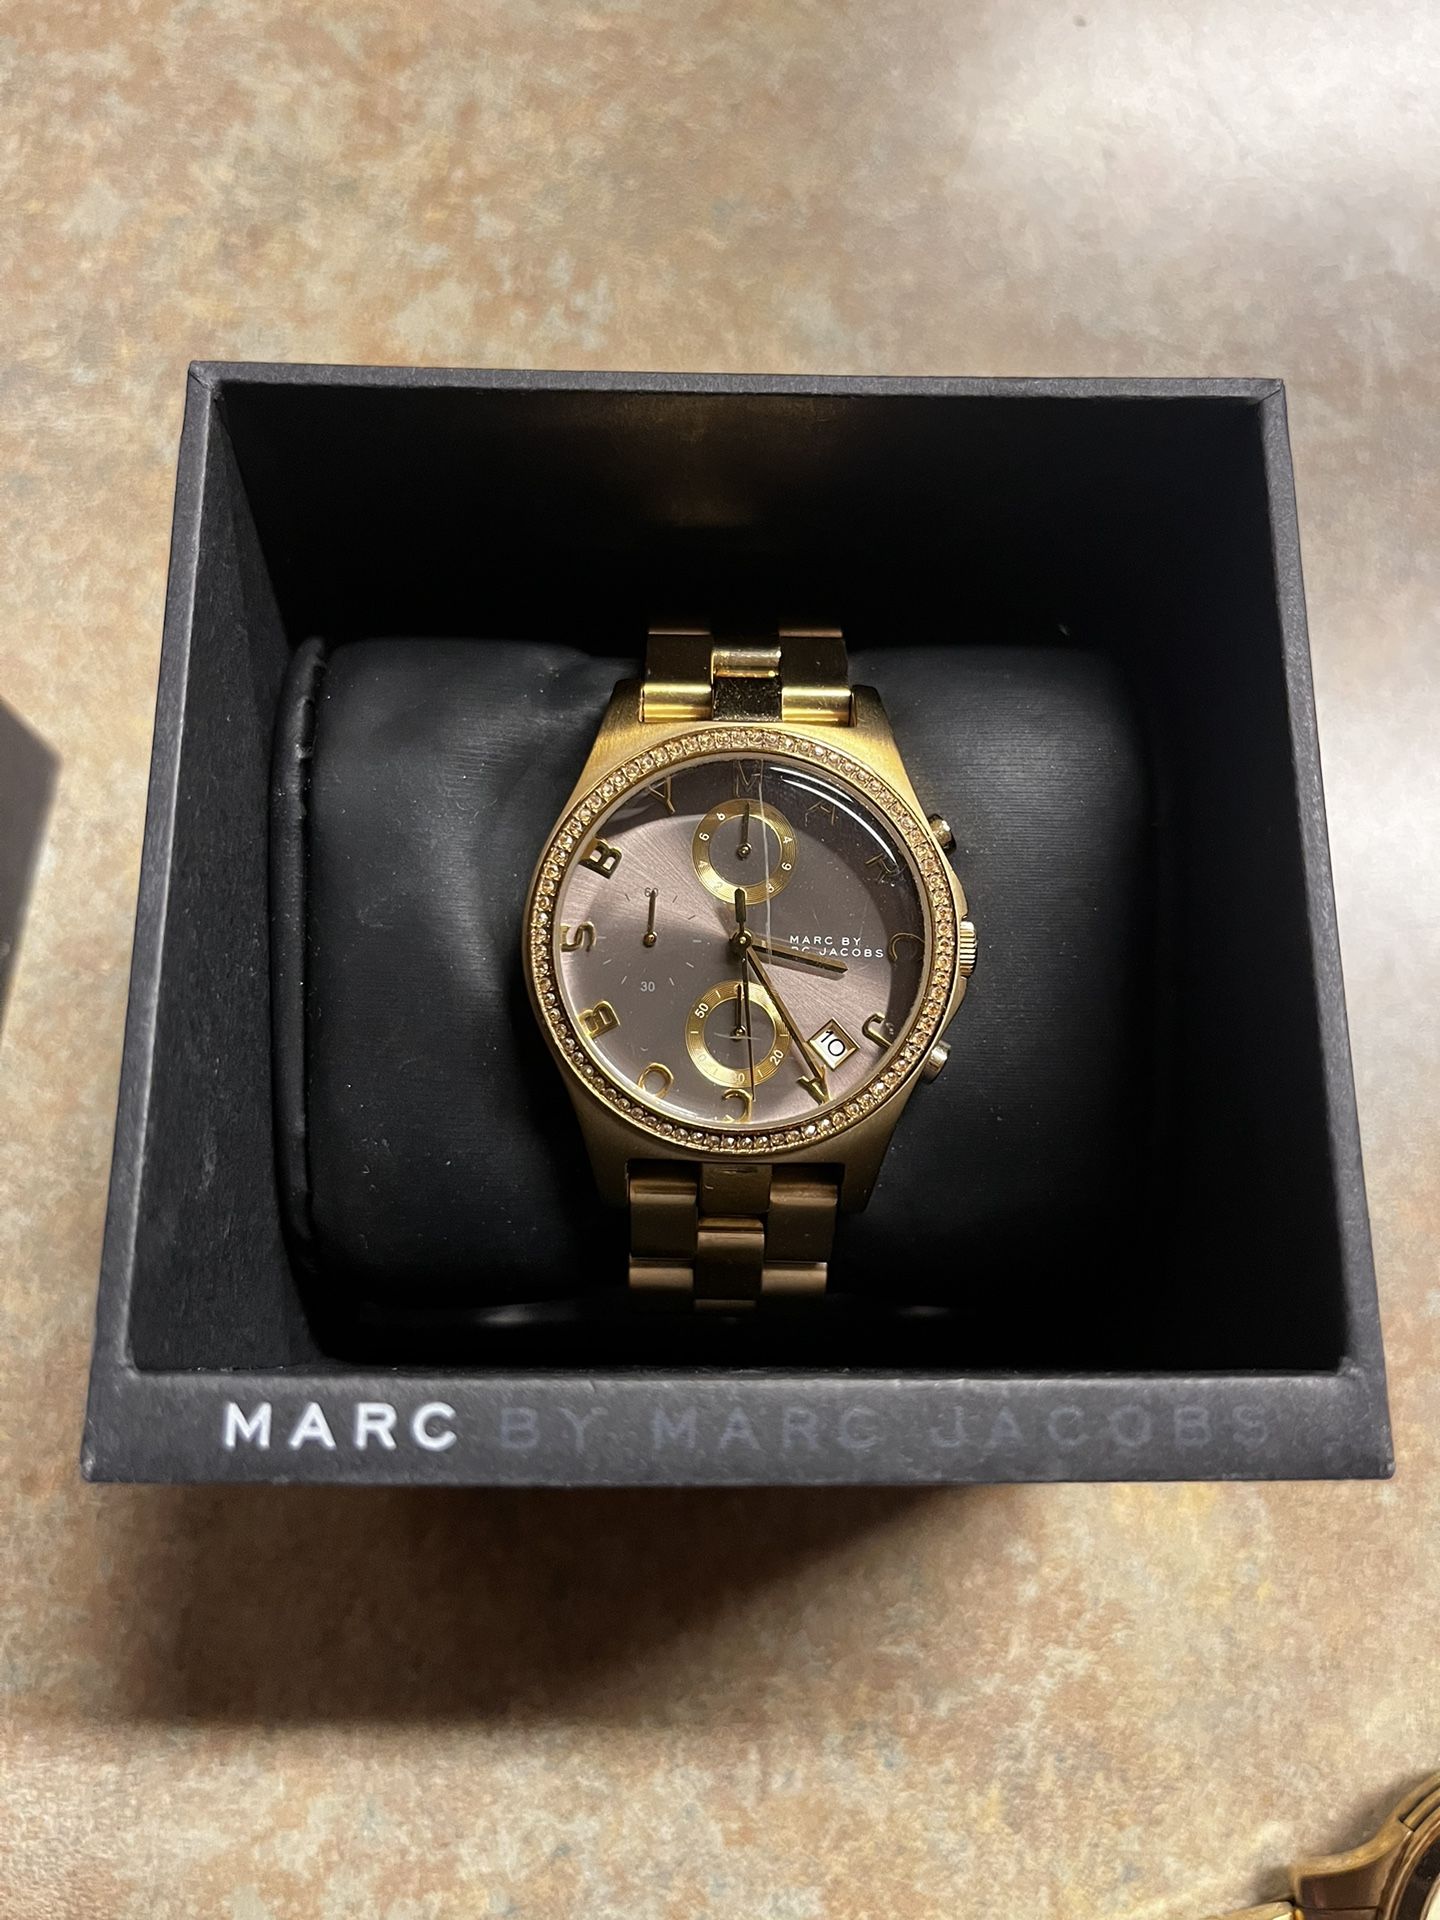 Marc Jacobs Woman’s Watch